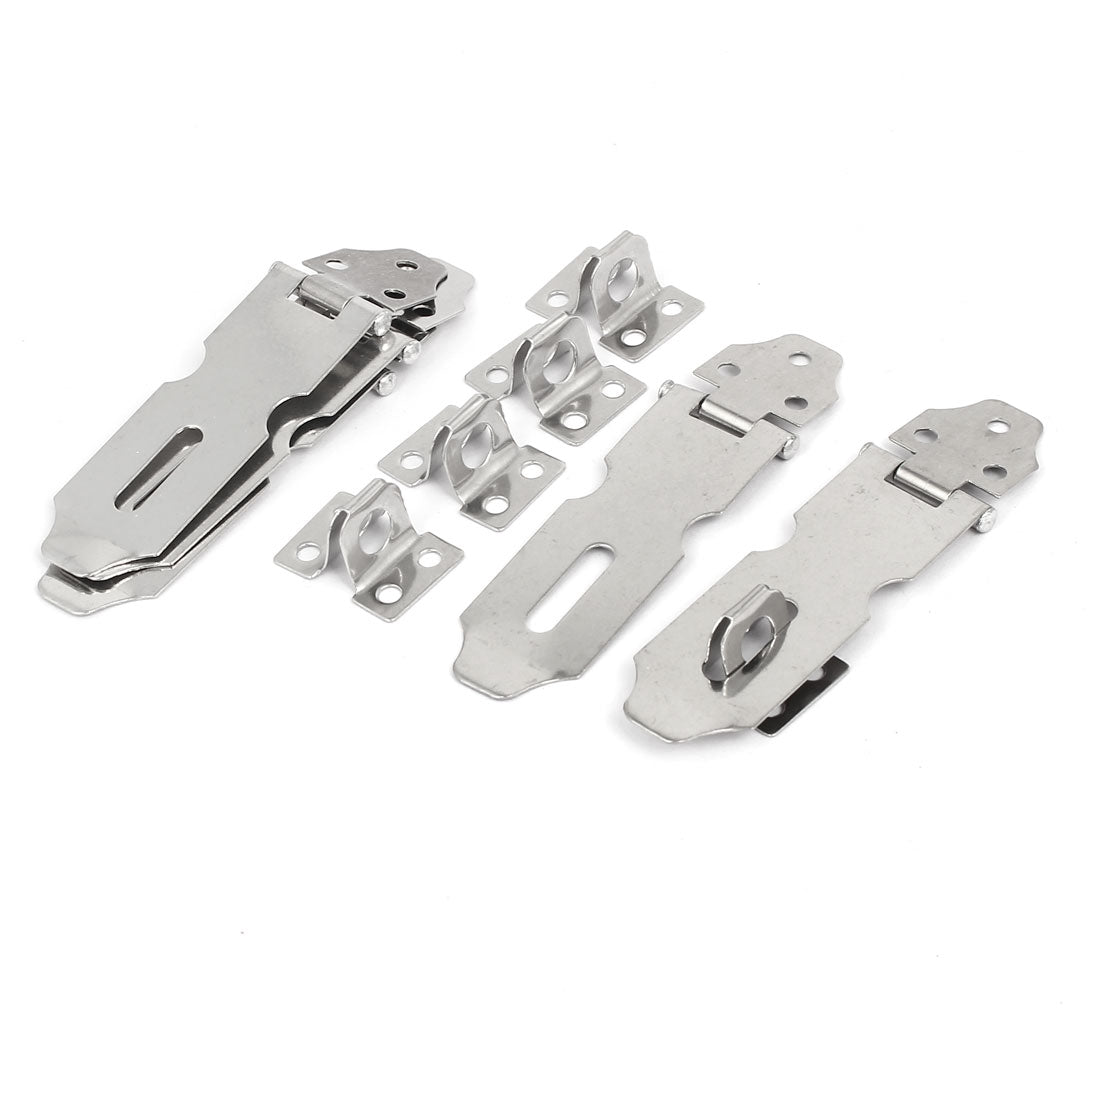 uxcell Uxcell Cupboard Drawer Safety Padlock Door Latch Lock Hasp Staples Silver Tone 5pcs